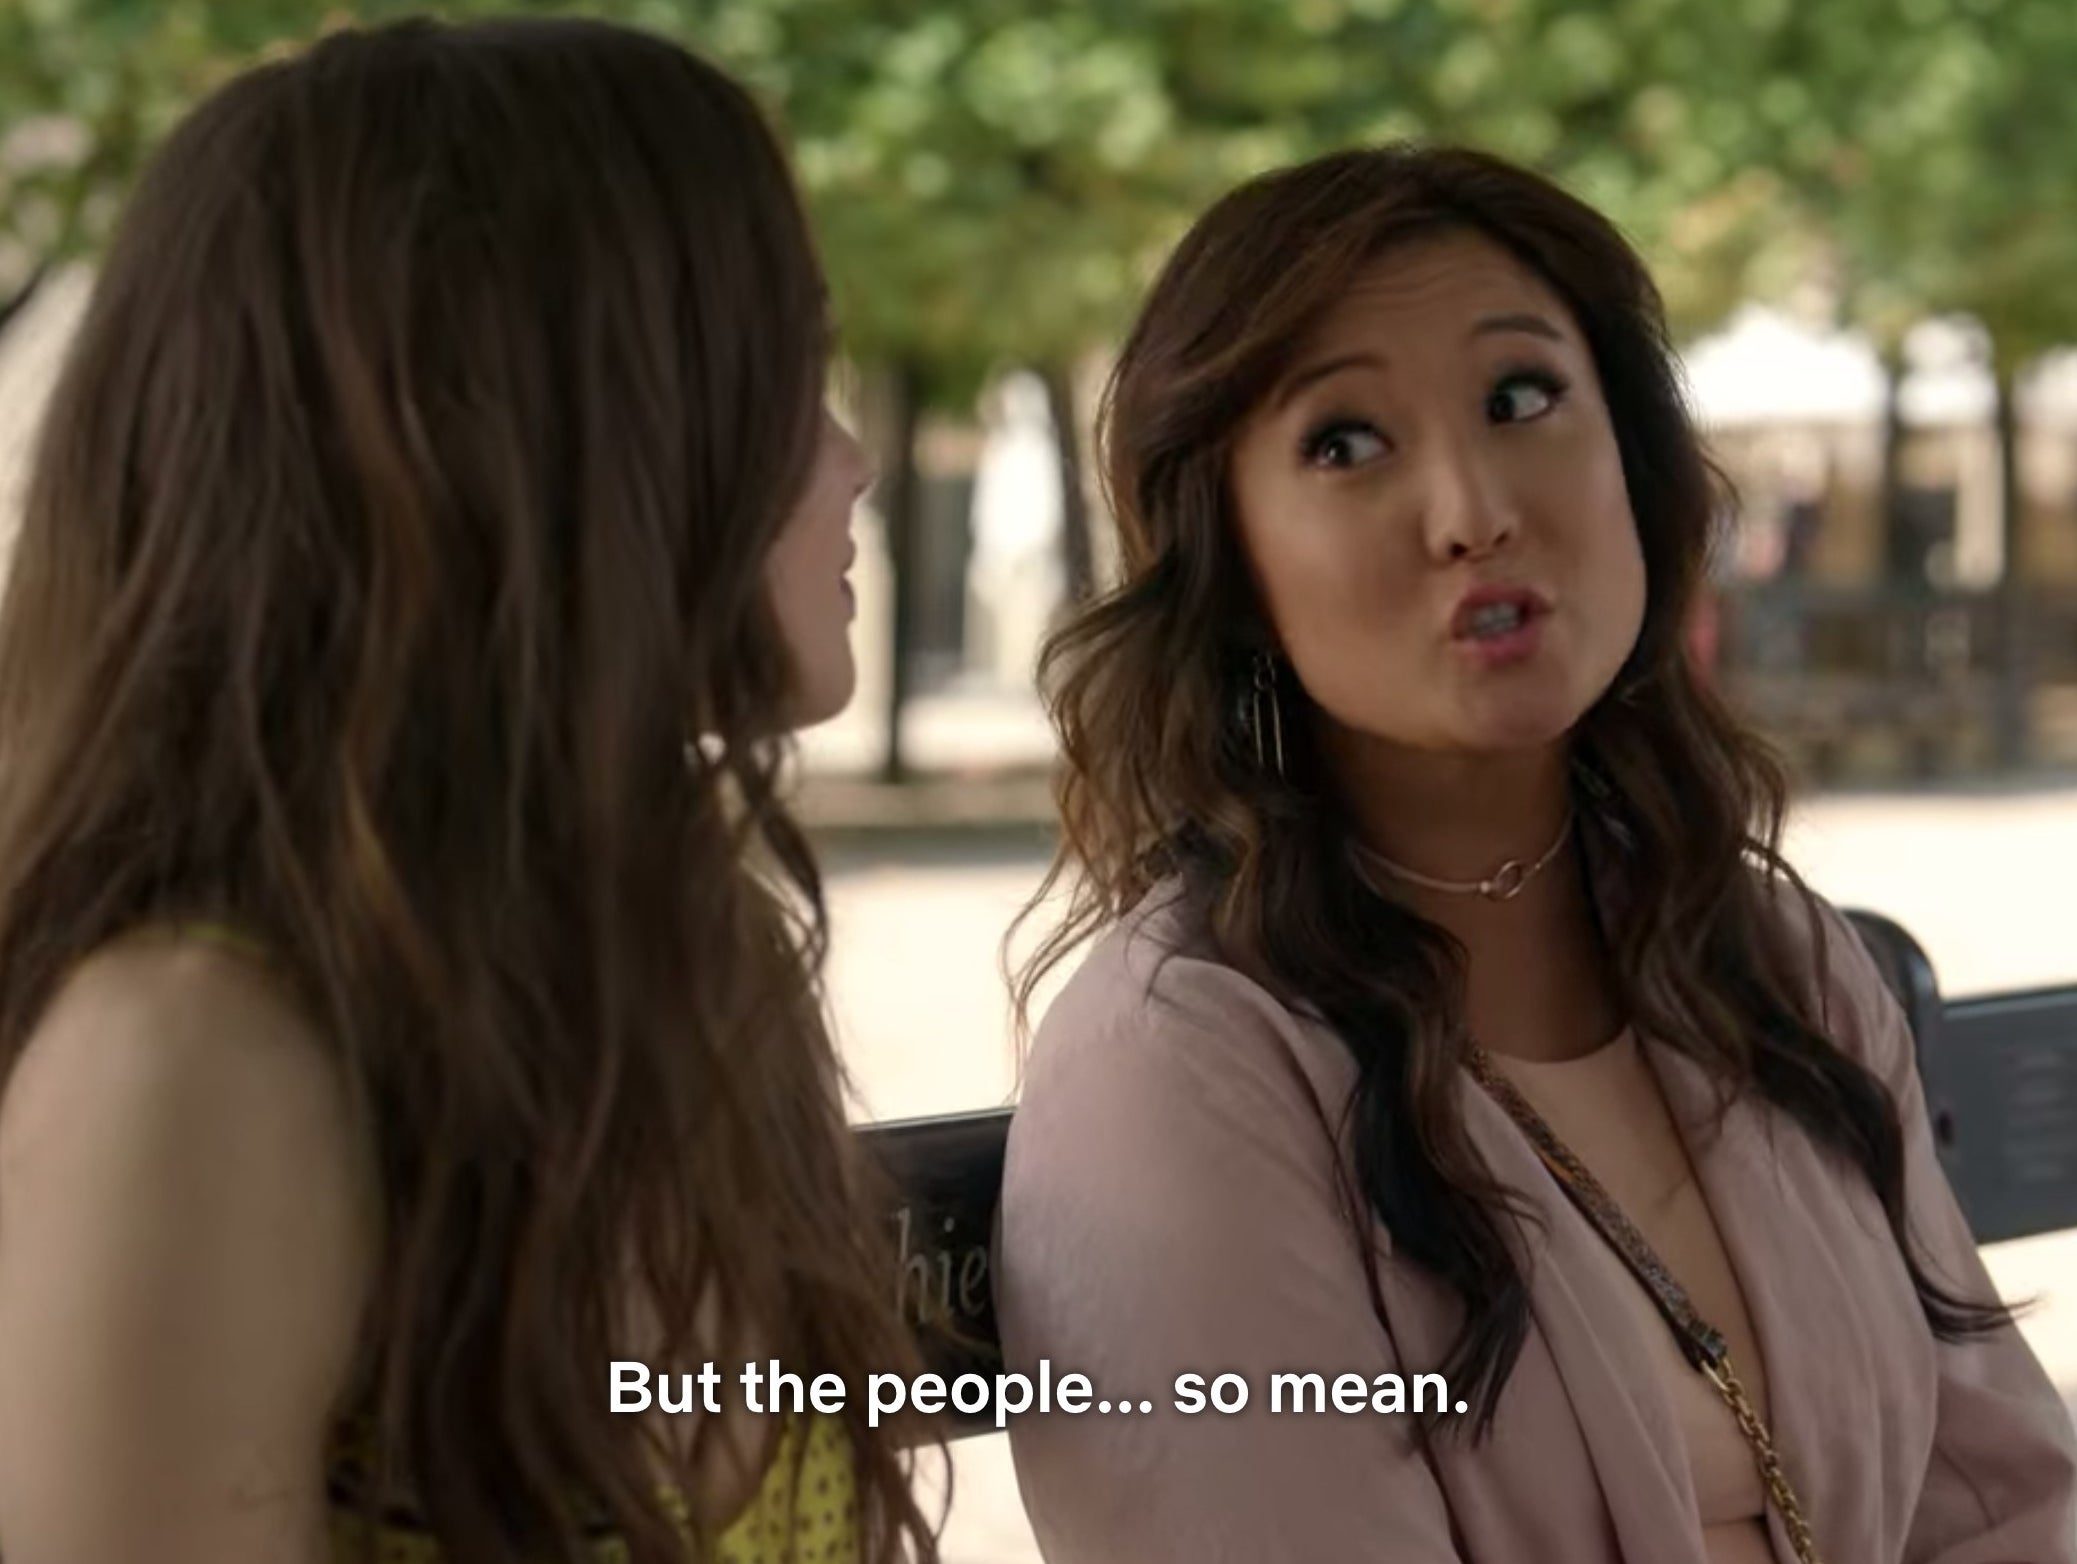 Emily telling her friend that the people in Paris are &quot;so mean.&quot;